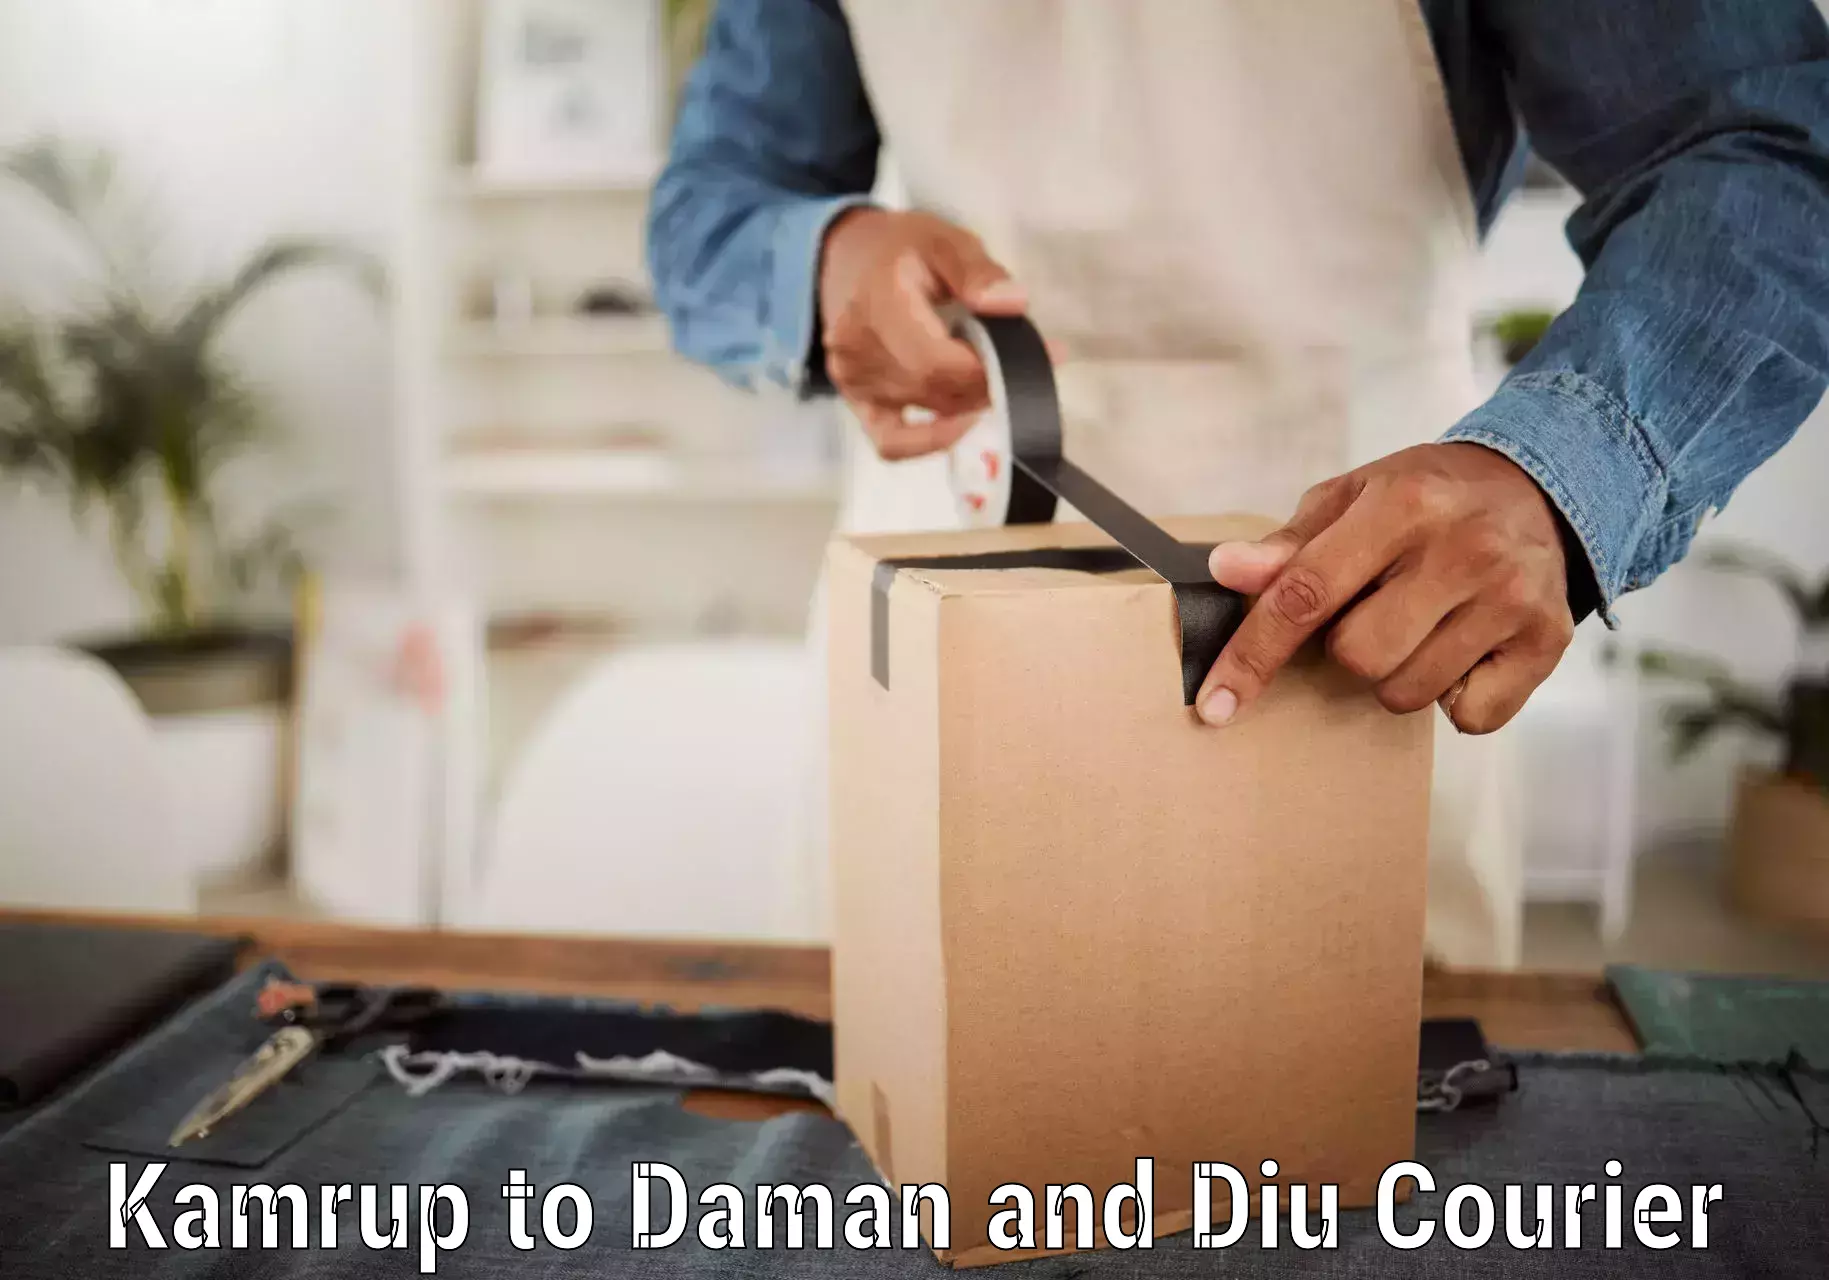 Courier service comparison in Kamrup to Daman and Diu